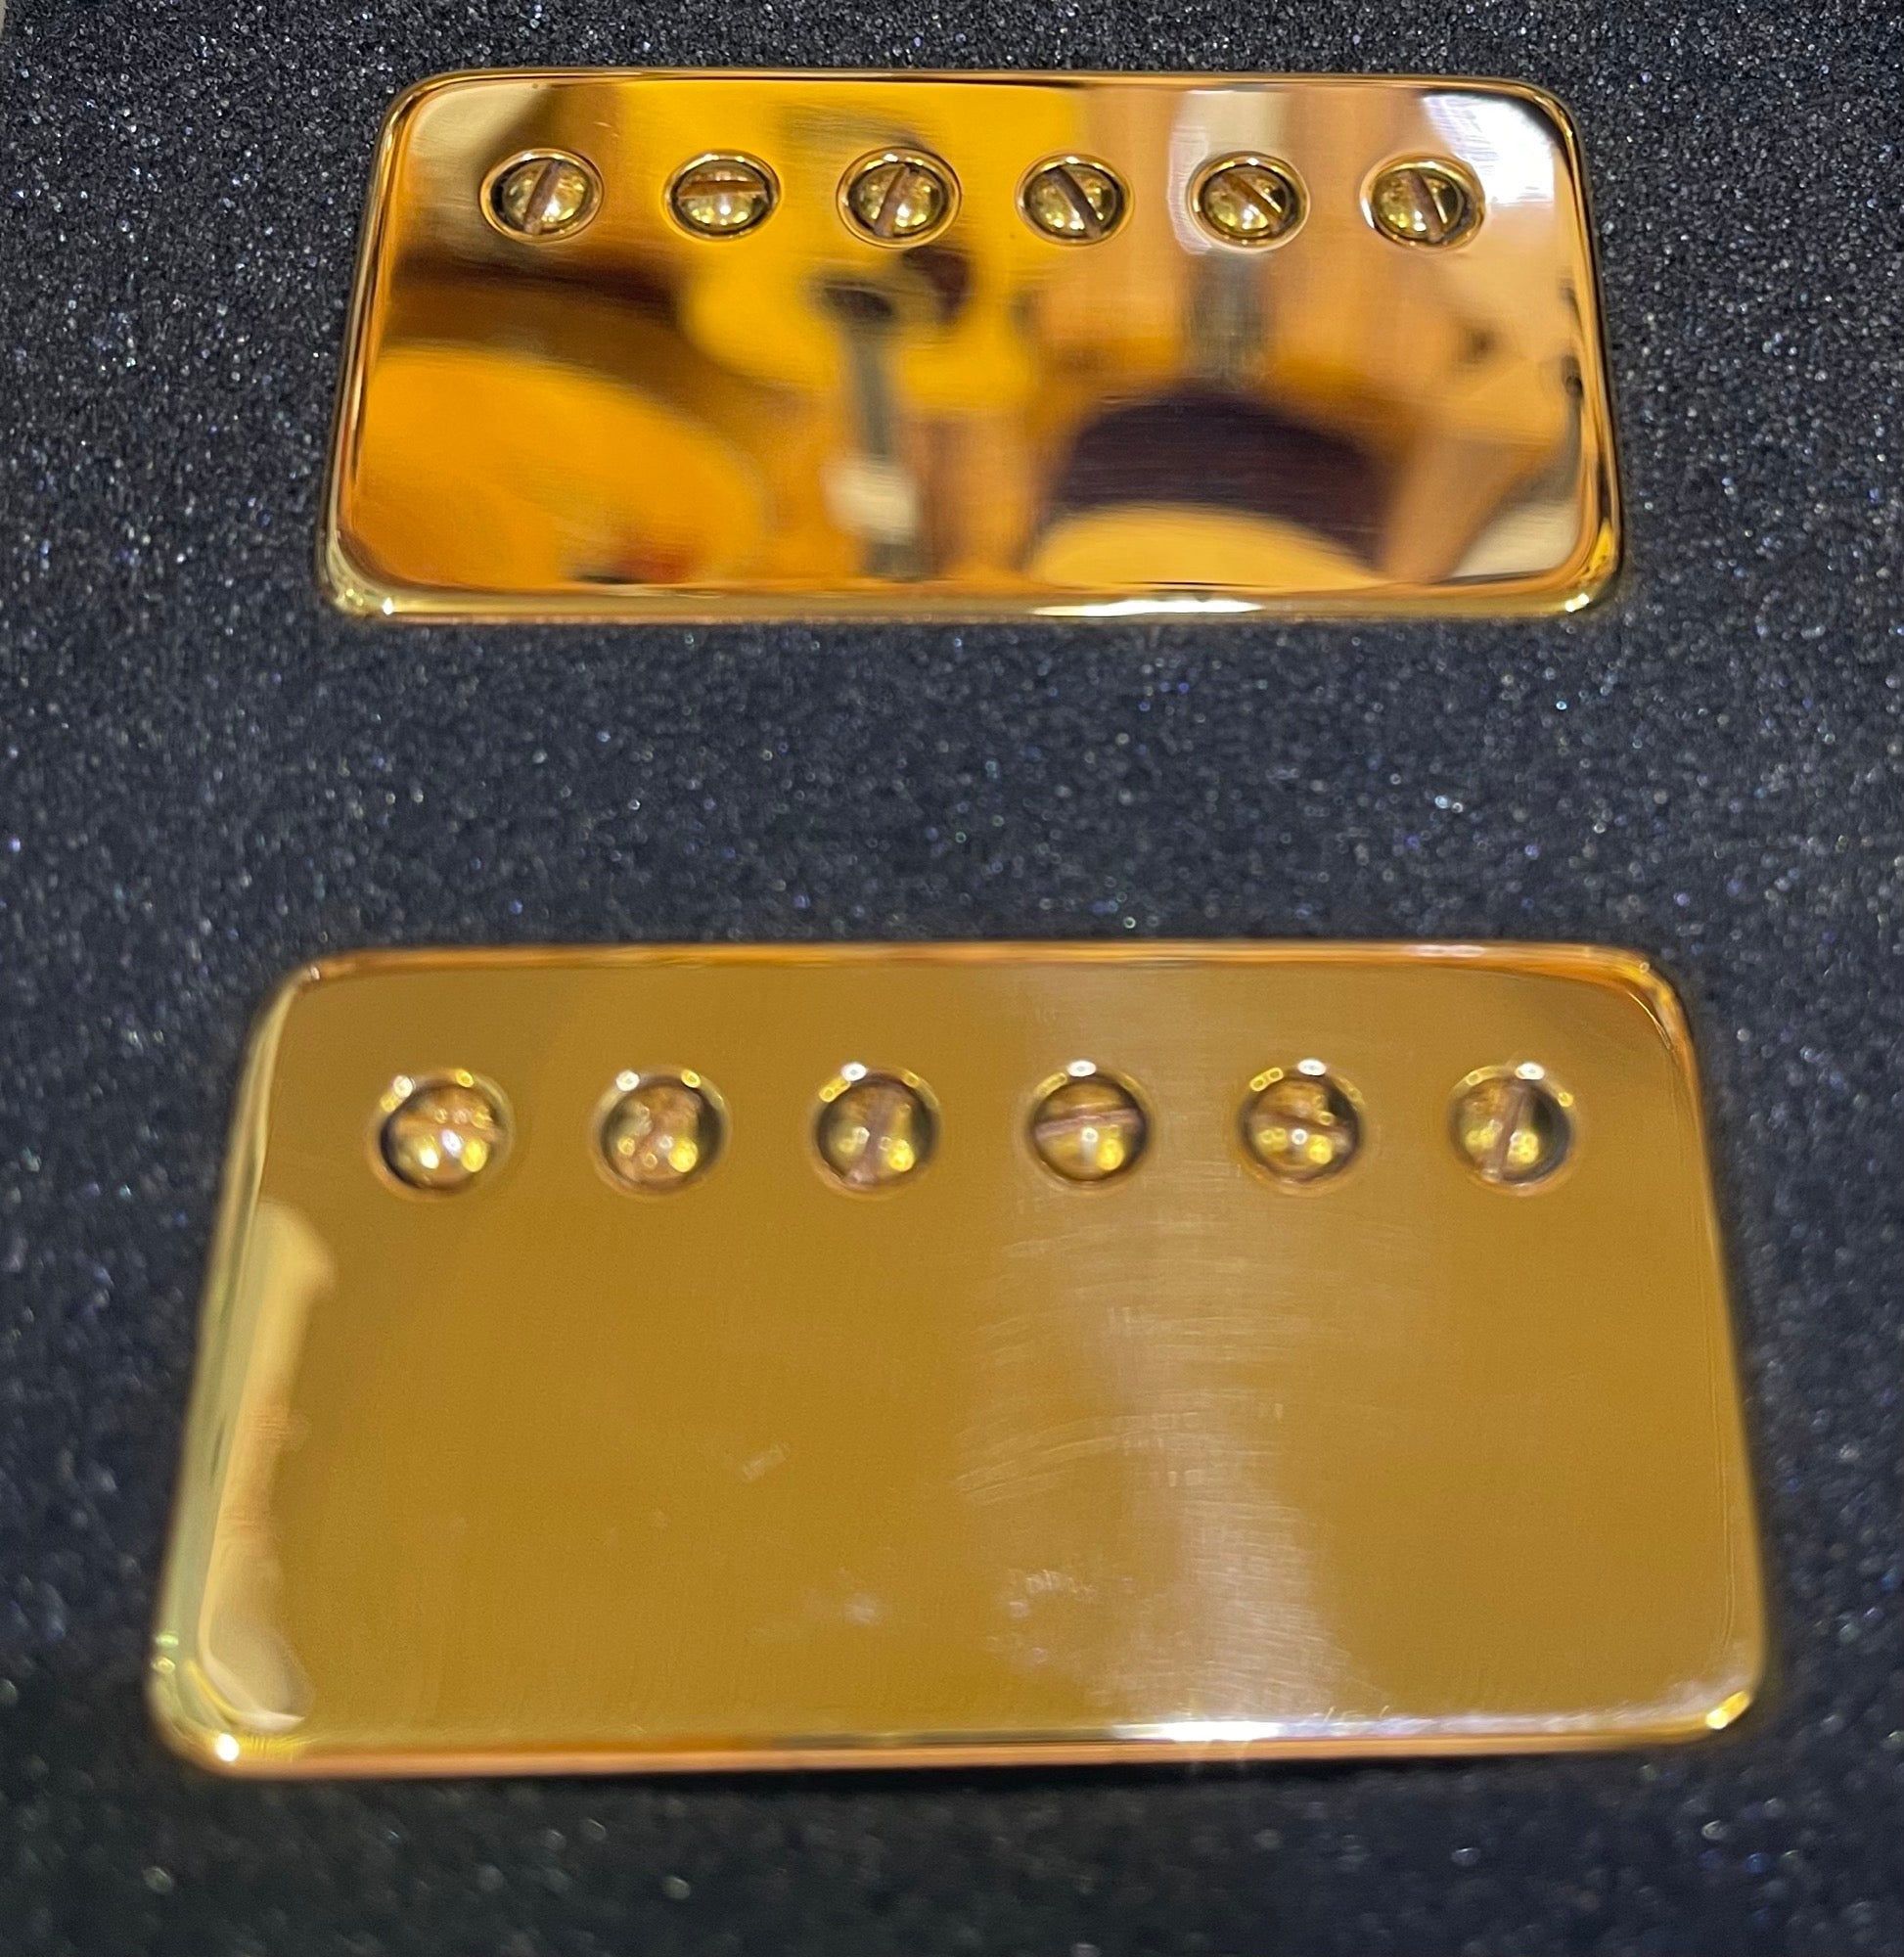 Hand Wound Guitar and Bass Pickups | Bare Knuckle Pickups